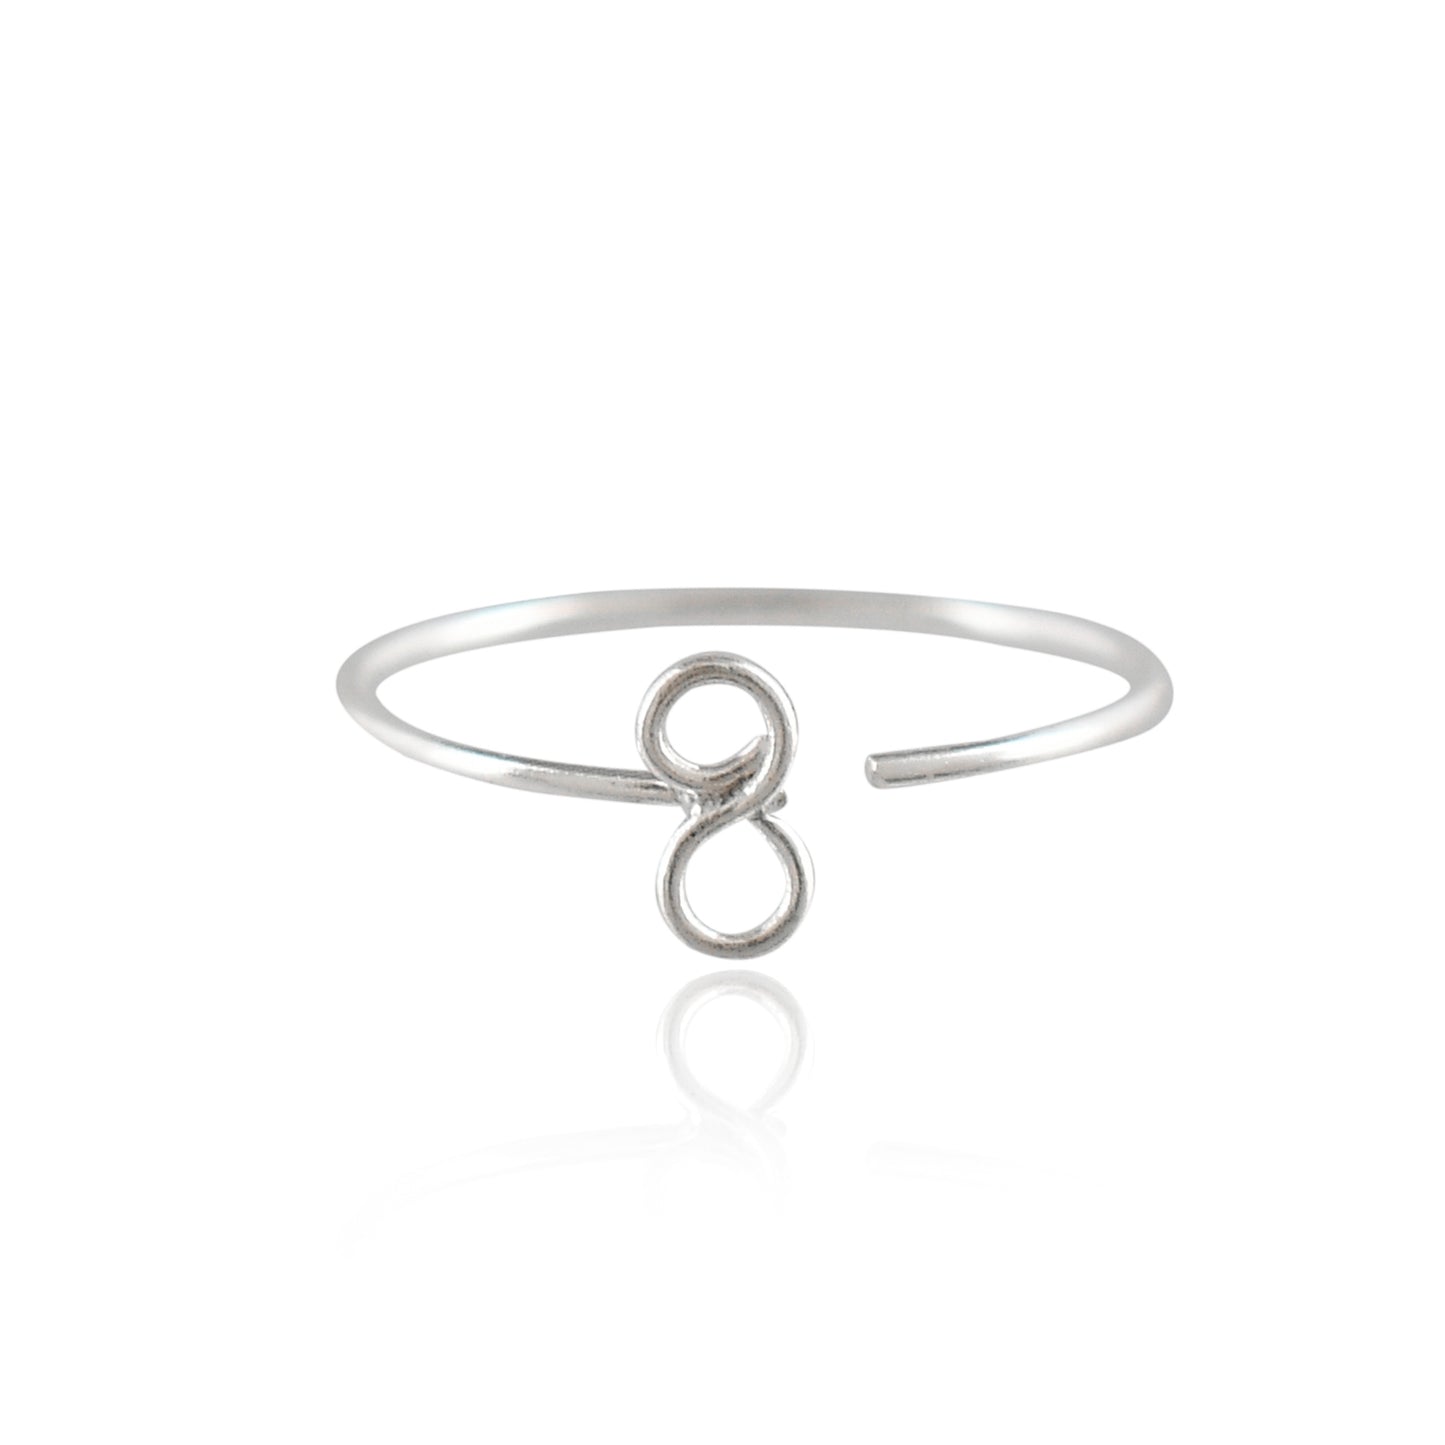 Women's Handmade Sterling Silver 925 Infinity Nose Ring - 10mm